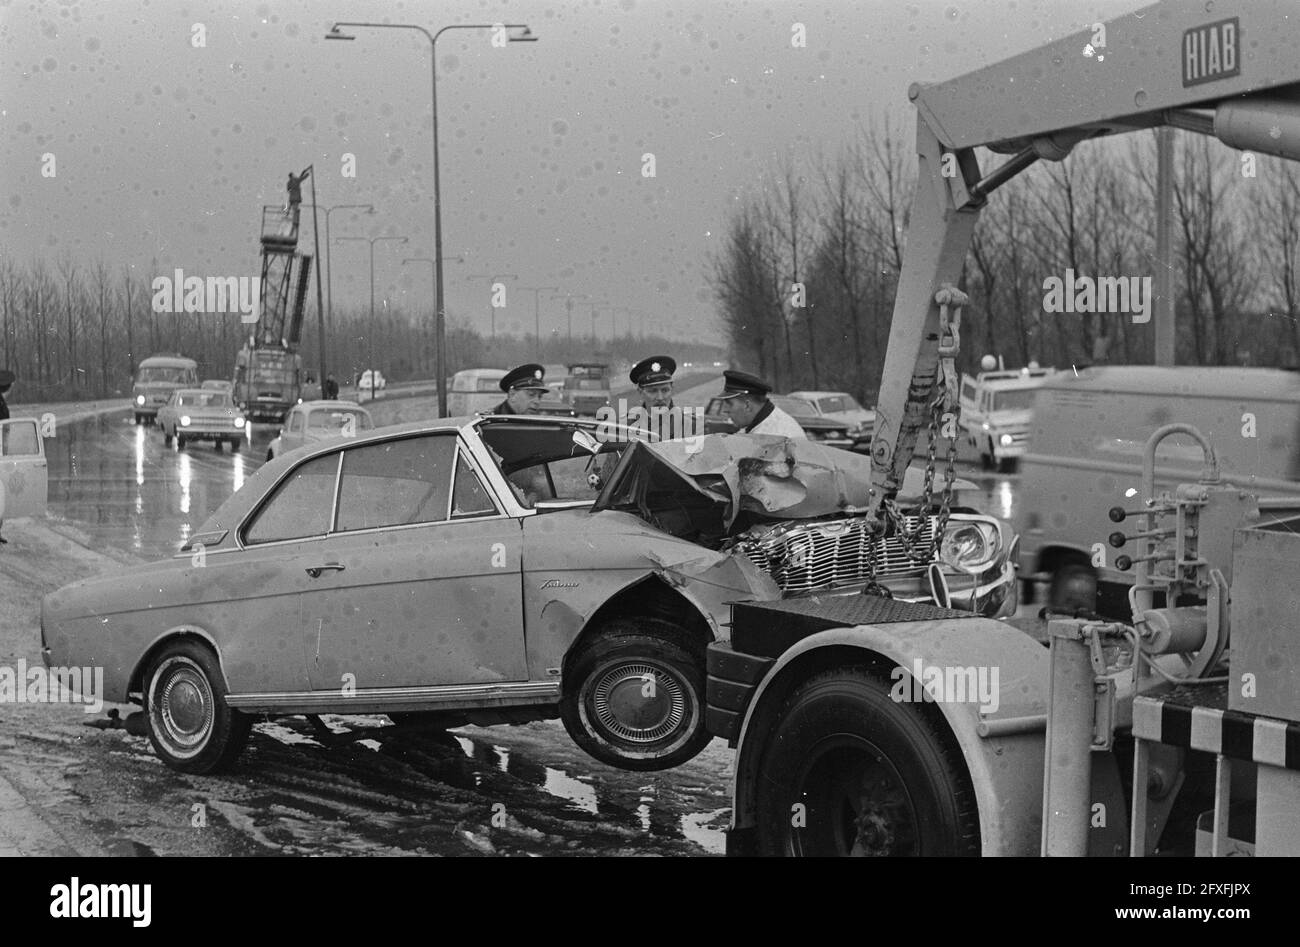 Two autos collide on Gooiseweg, one of the skidded cars, March 31, 1967, cars, accidents, The Netherlands, 20th century press agency photo, news to remember, documentary, historic photography 1945-1990, visual stories, human history of the Twentieth Century, capturing moments in time Stock Photo